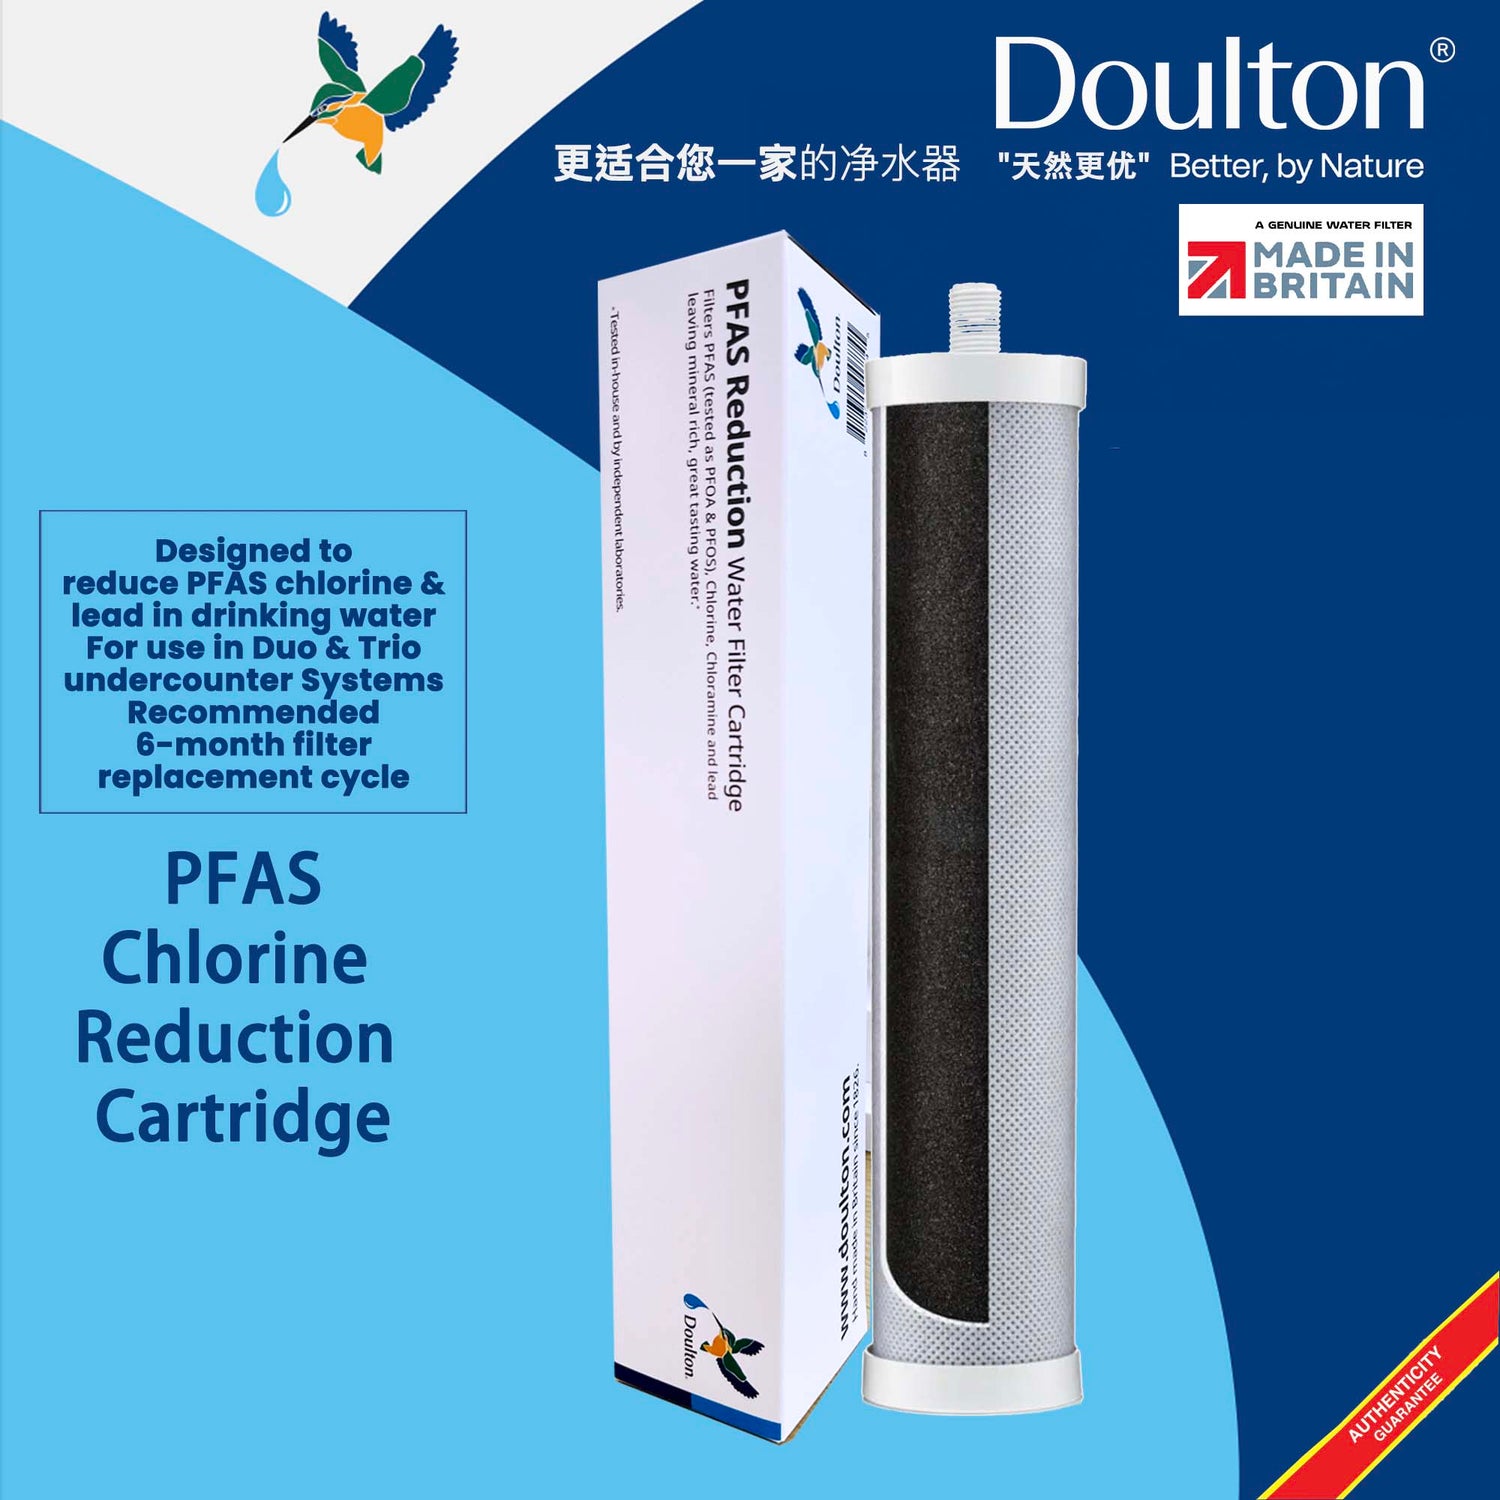 Doulton PFAS Reduction Cartridge for DUO systems, treatment carbon filter for forever chemical